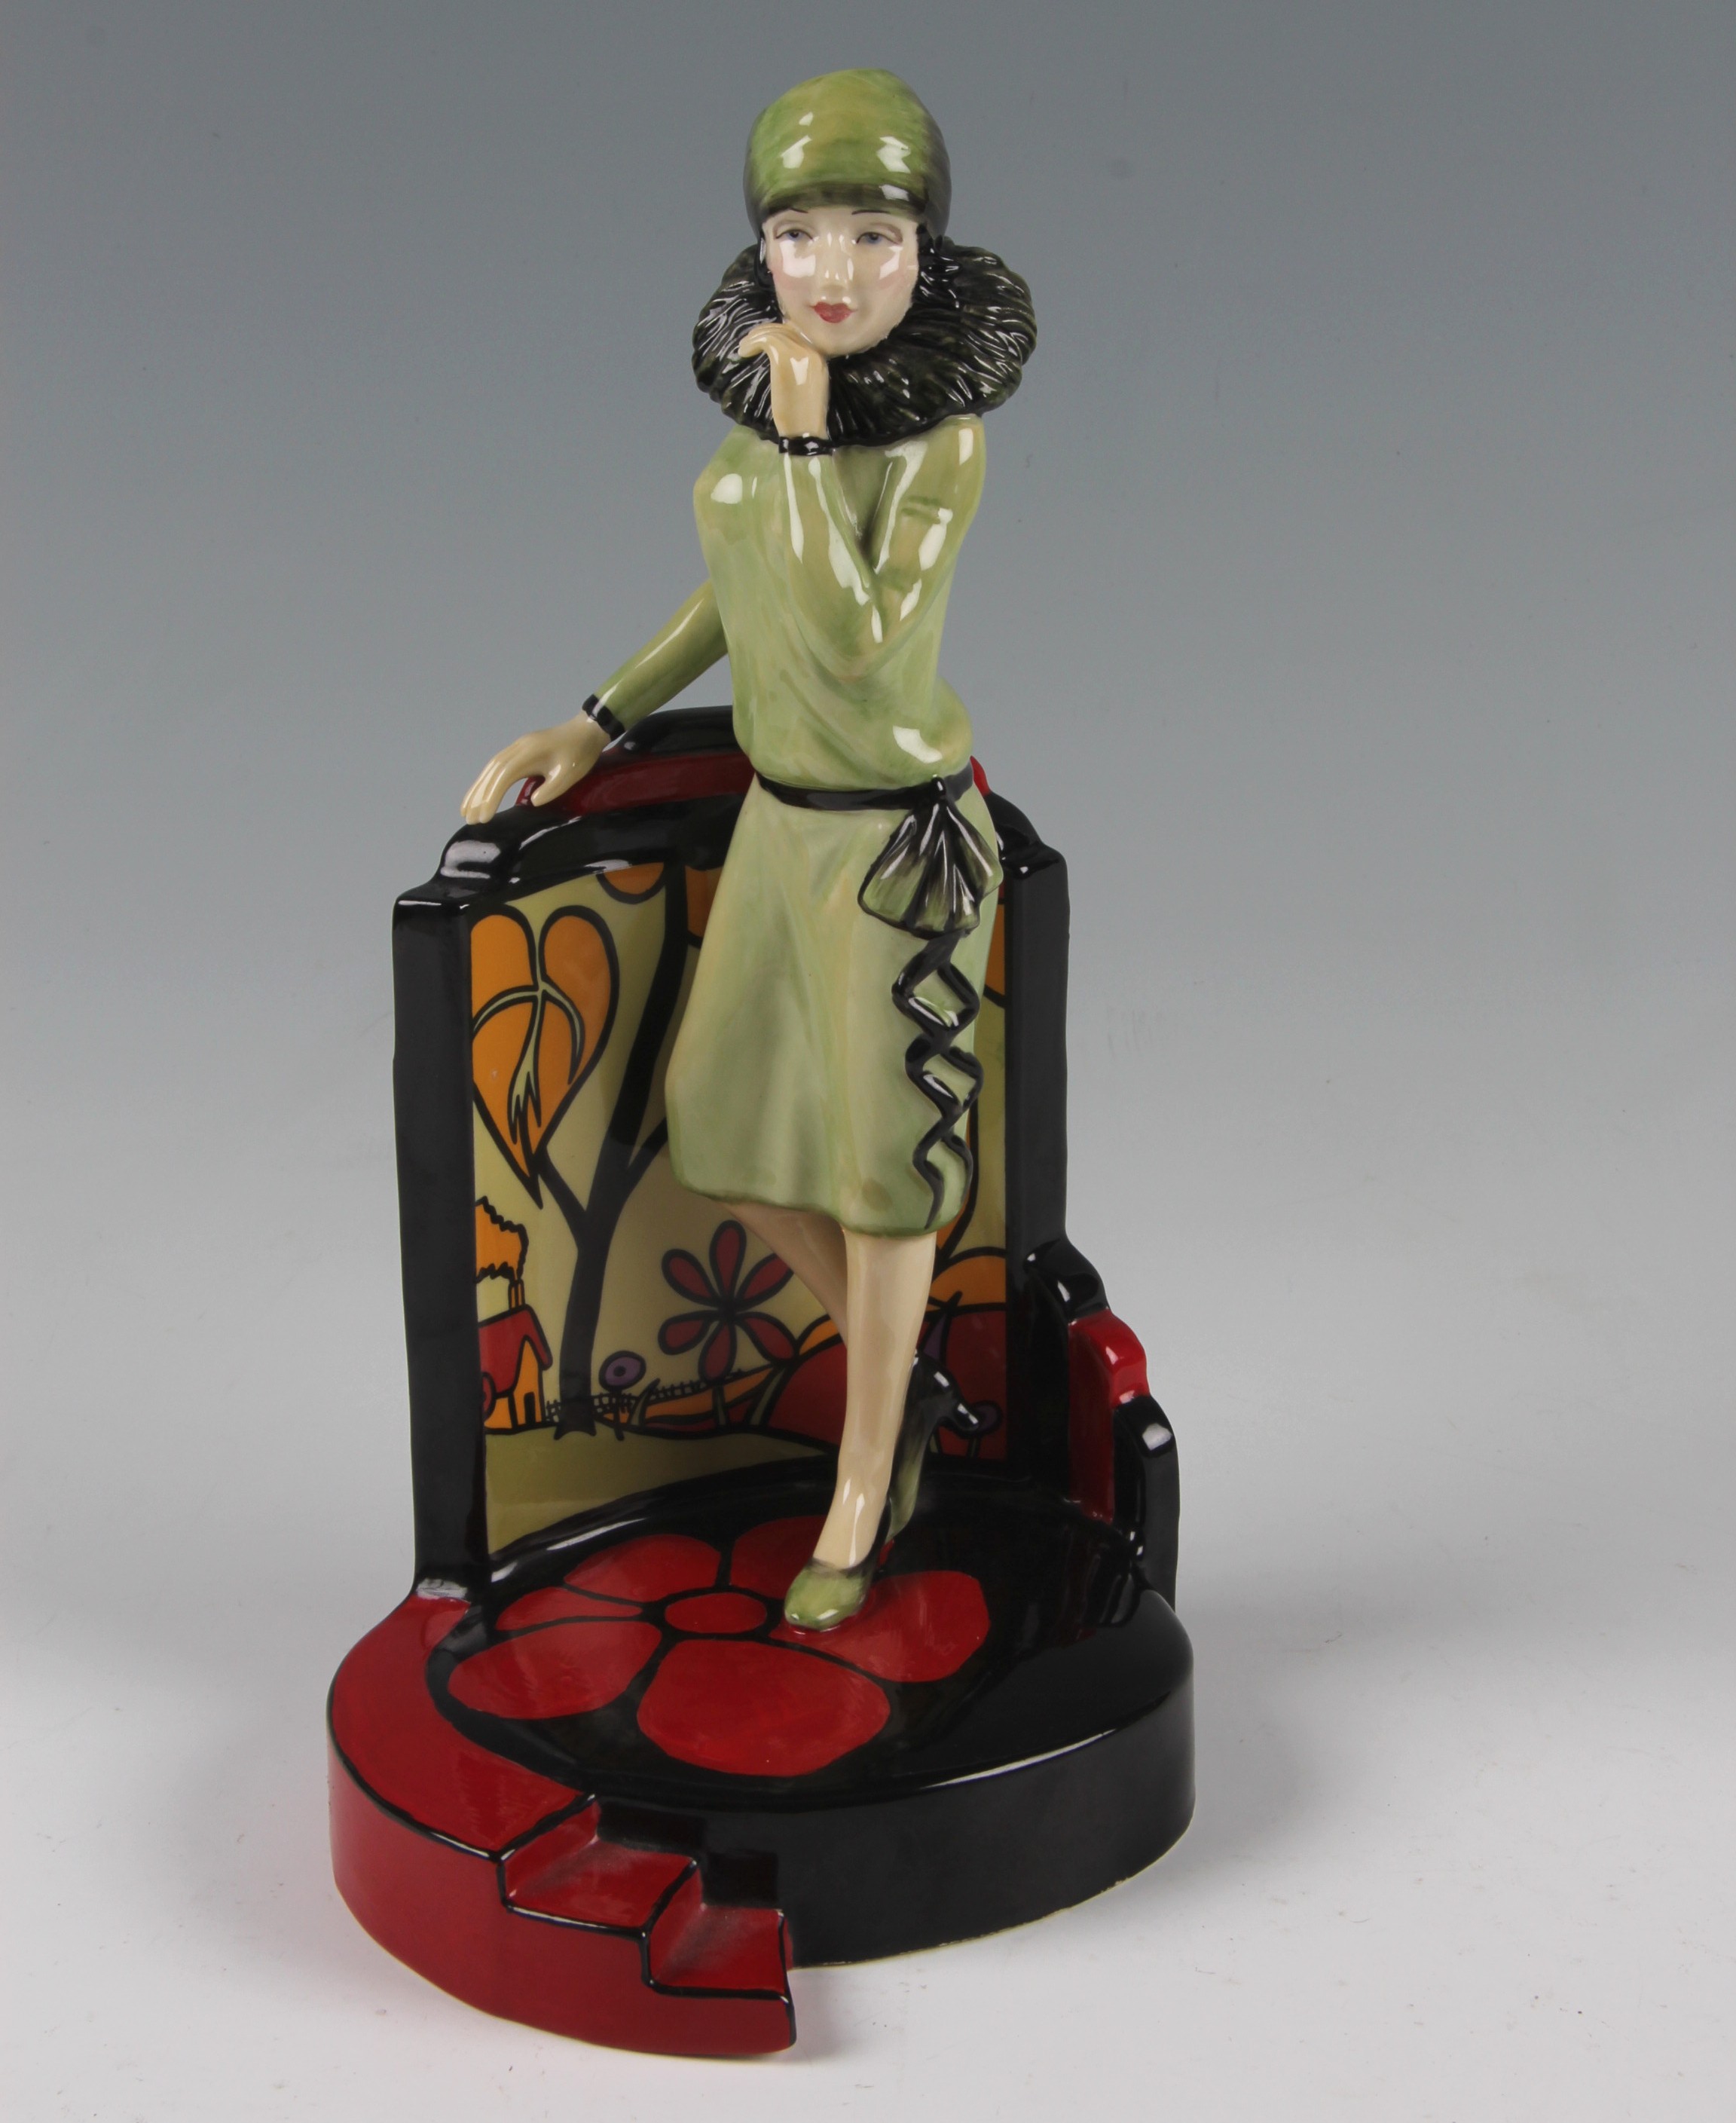 A limited edition Kevin Francis figure, Clarice Cliff Centre Stage, by A Moss, 352/500, produced by